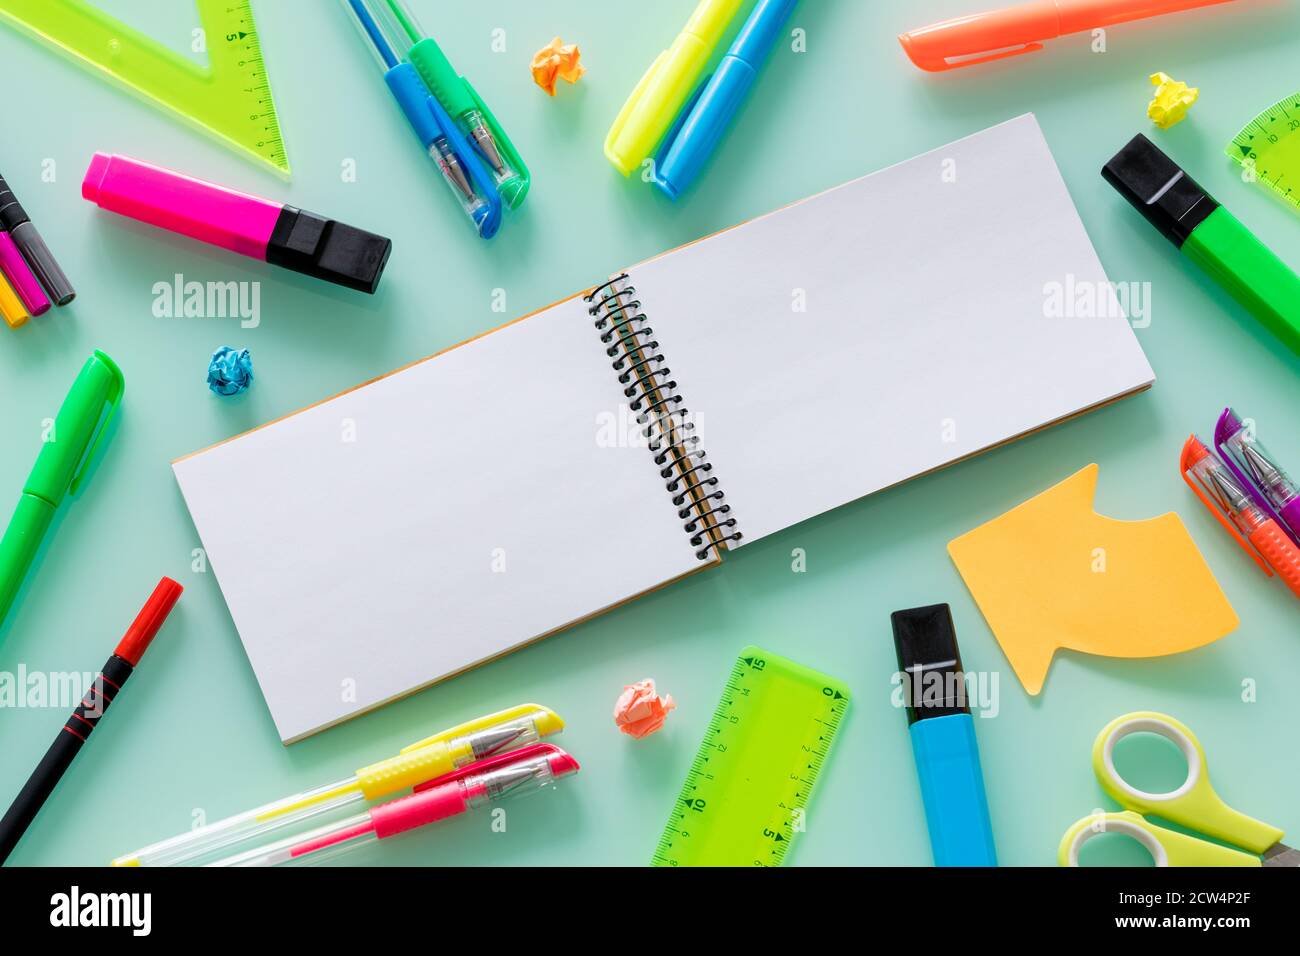 school and office items, colored pens, staples, felt-tip pens, set squares,  a blank notebook for your own text in the center Stock Photo - Alamy